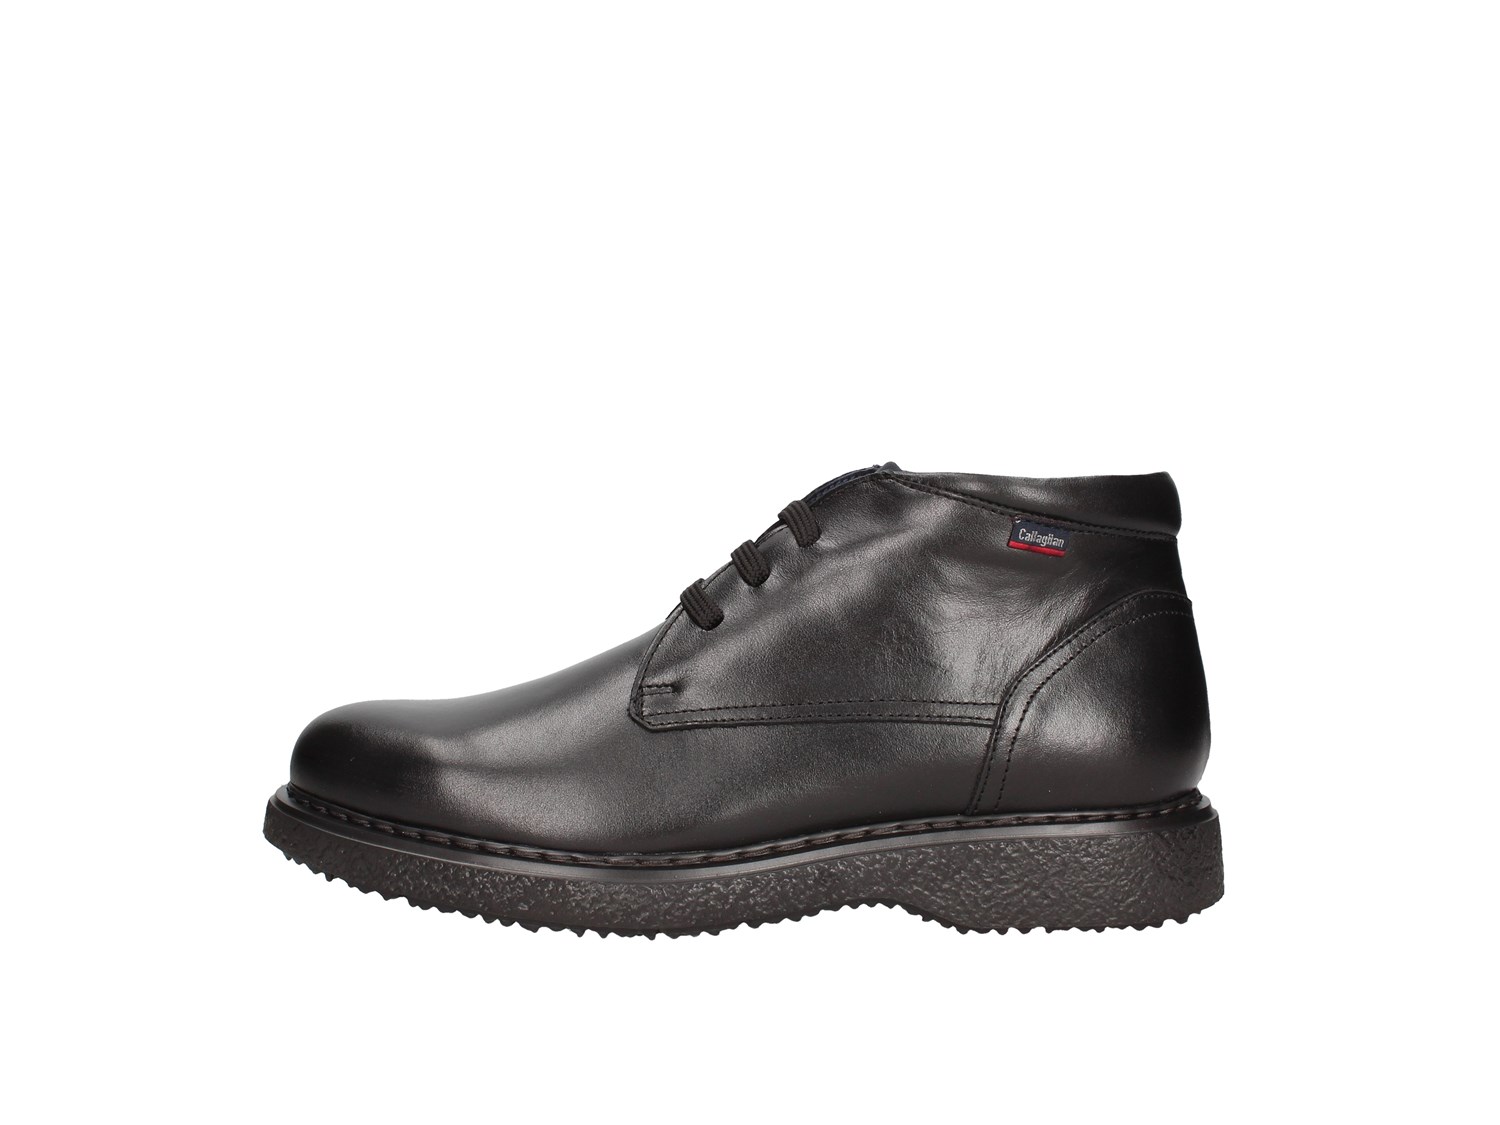 Callaghan 12302 Black Shoes Man ankle